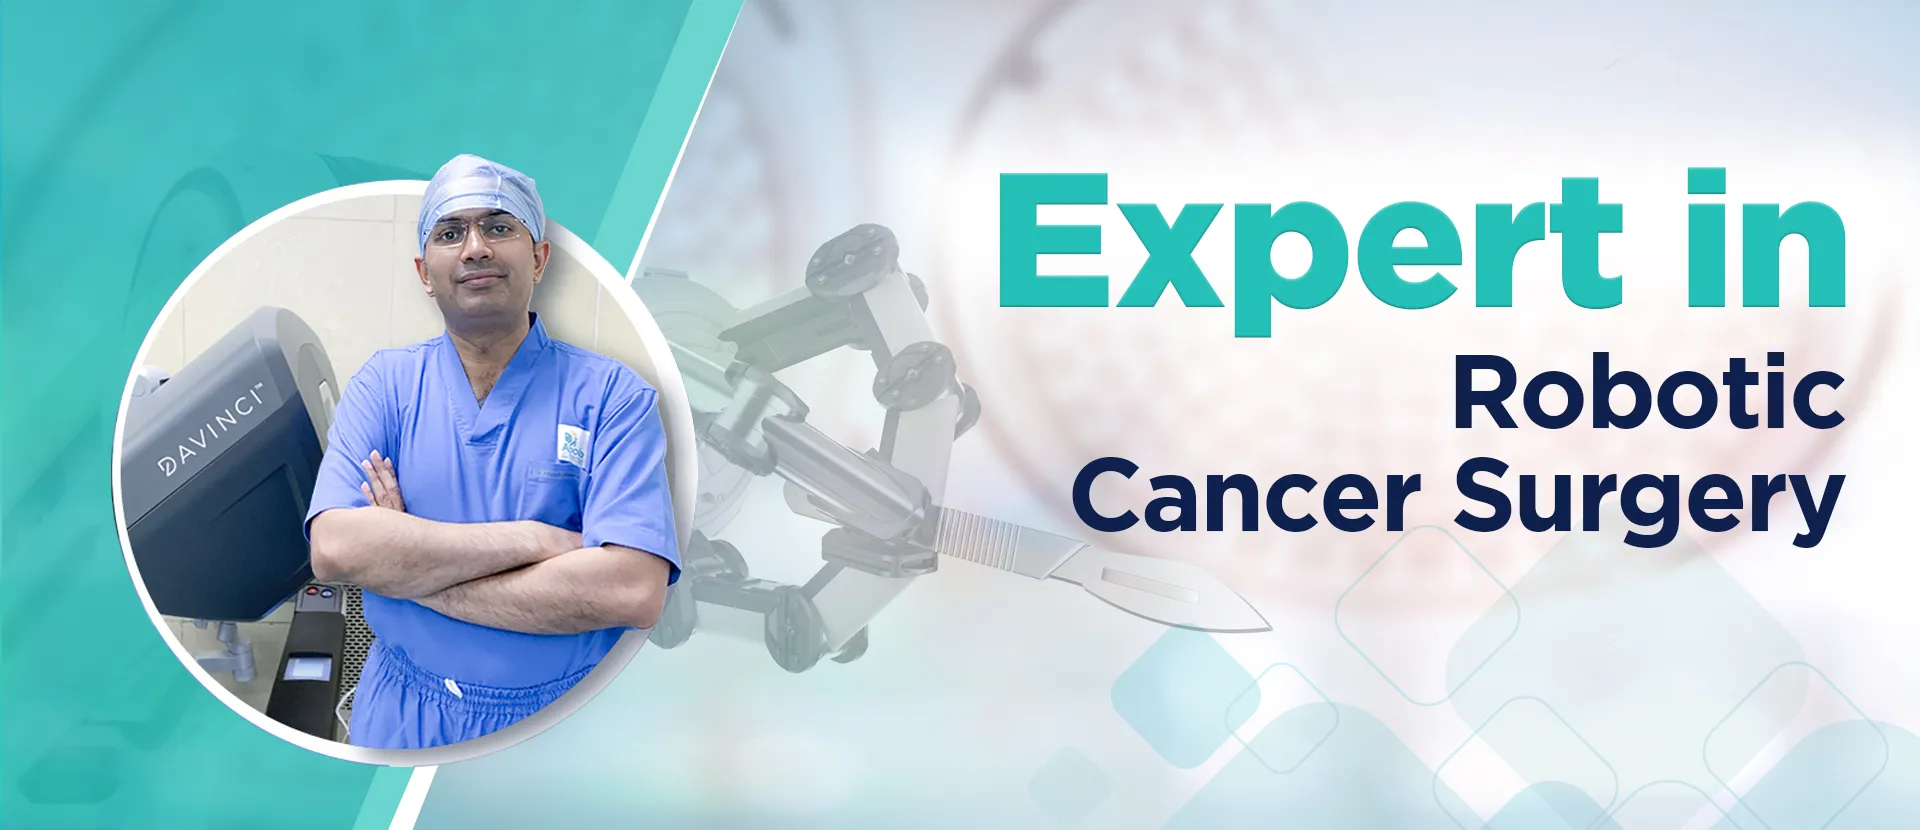 Best robotic cancer surgery in Ahmedabad, India